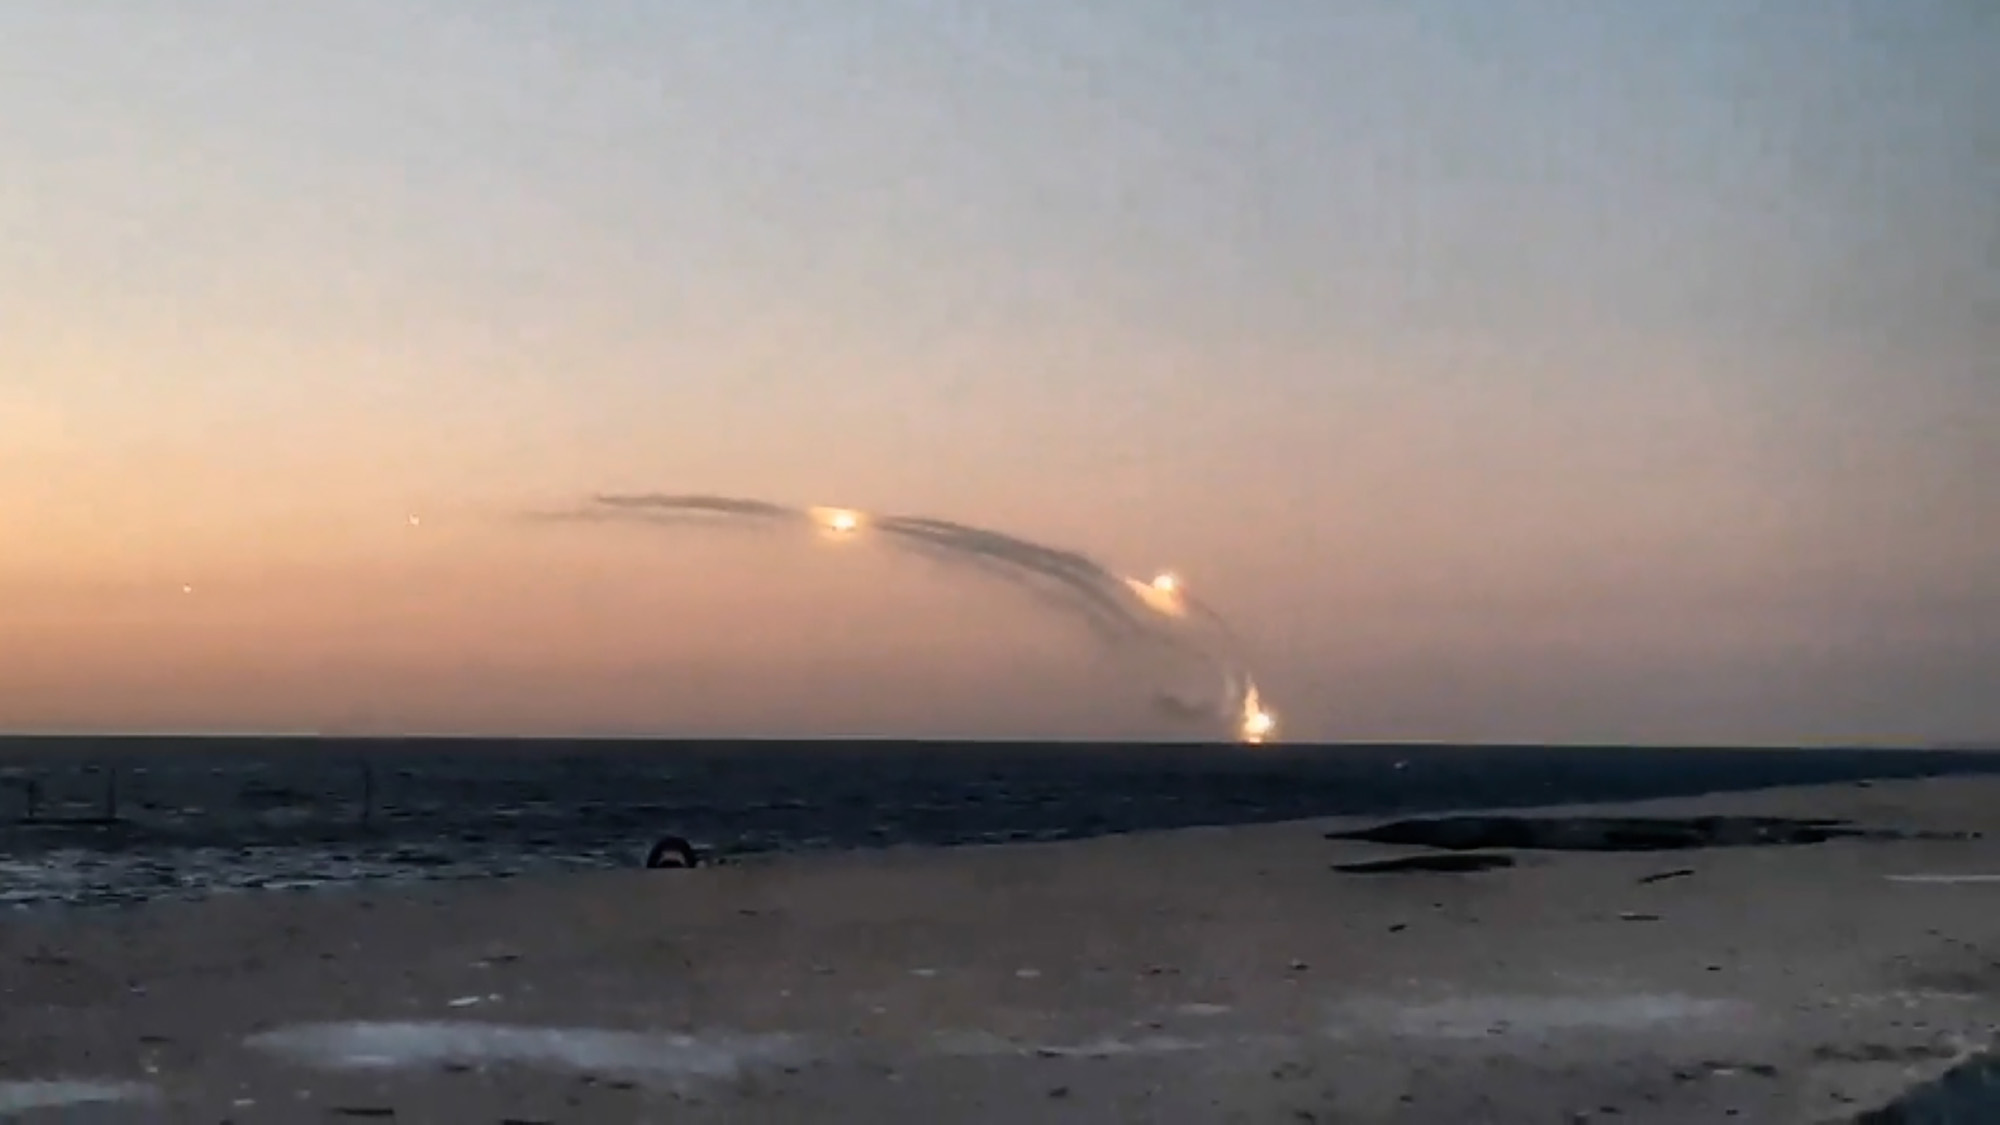 A video from a Telegram post on March 22, shows the launch of several cruise missiles from a vessel located off the coast of Crimea, just west of the city of Sevastopol 